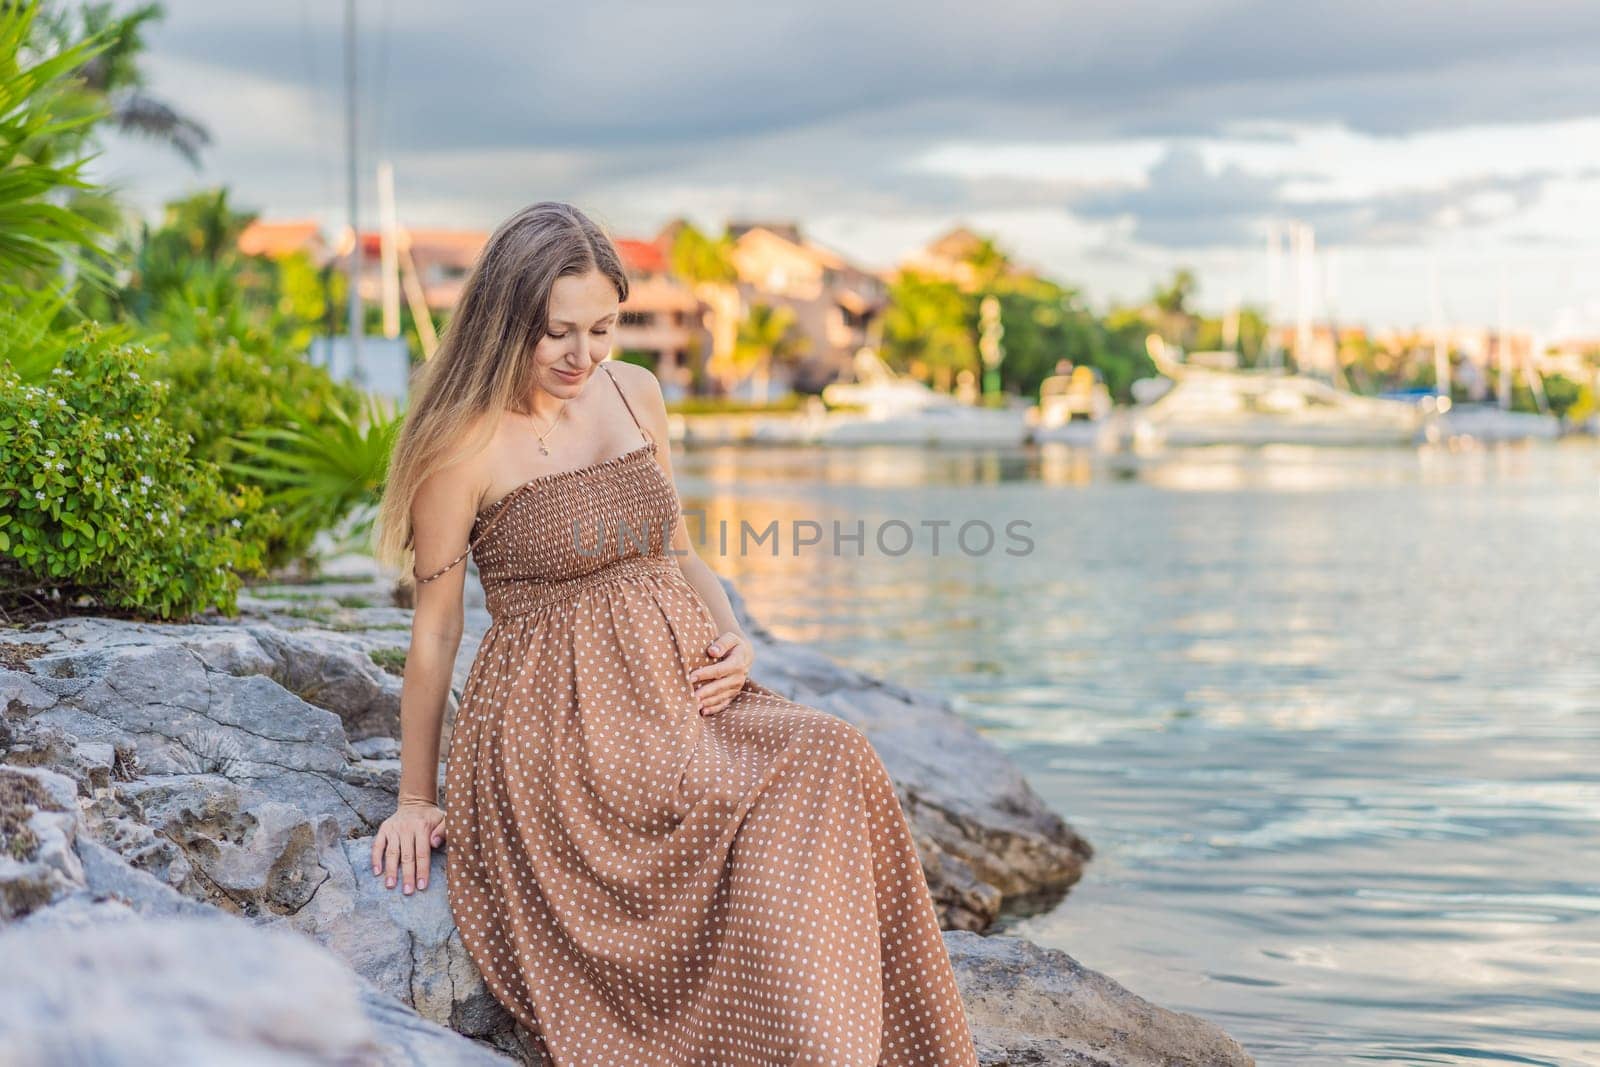 Pregnant woman hugging her tummy standing outdoors surrounded by nature. Pregnancy, expectation, motherhood concept by galitskaya